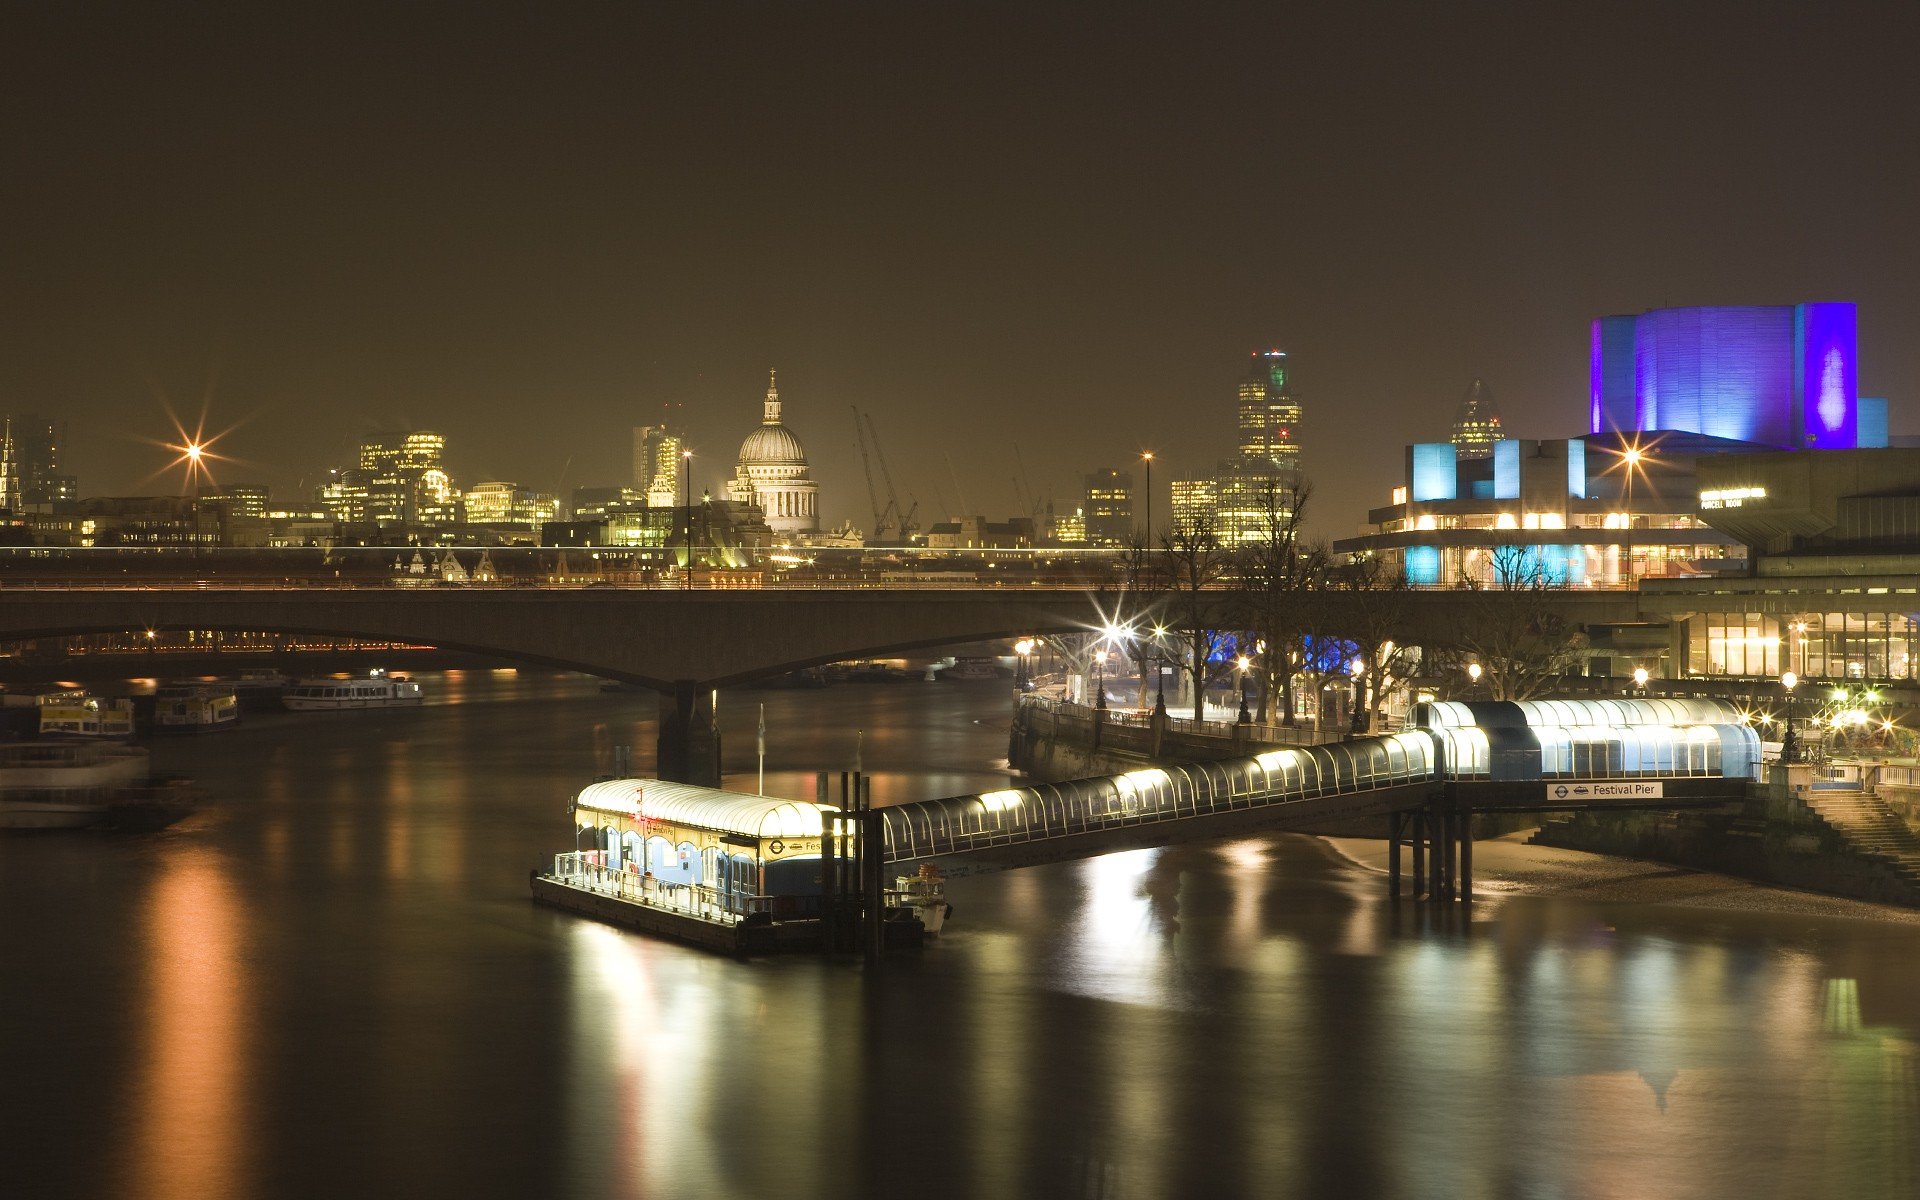 architecture, City, Cityscape, Night, Water, Lights, Reflection, Building, Skyscraper, London, England, UK, Bridge, Pier, Ship, Cathedral, Cranes (machine), 30 St Mary Axe, Modern, Trees, Long exposure Wallpaper